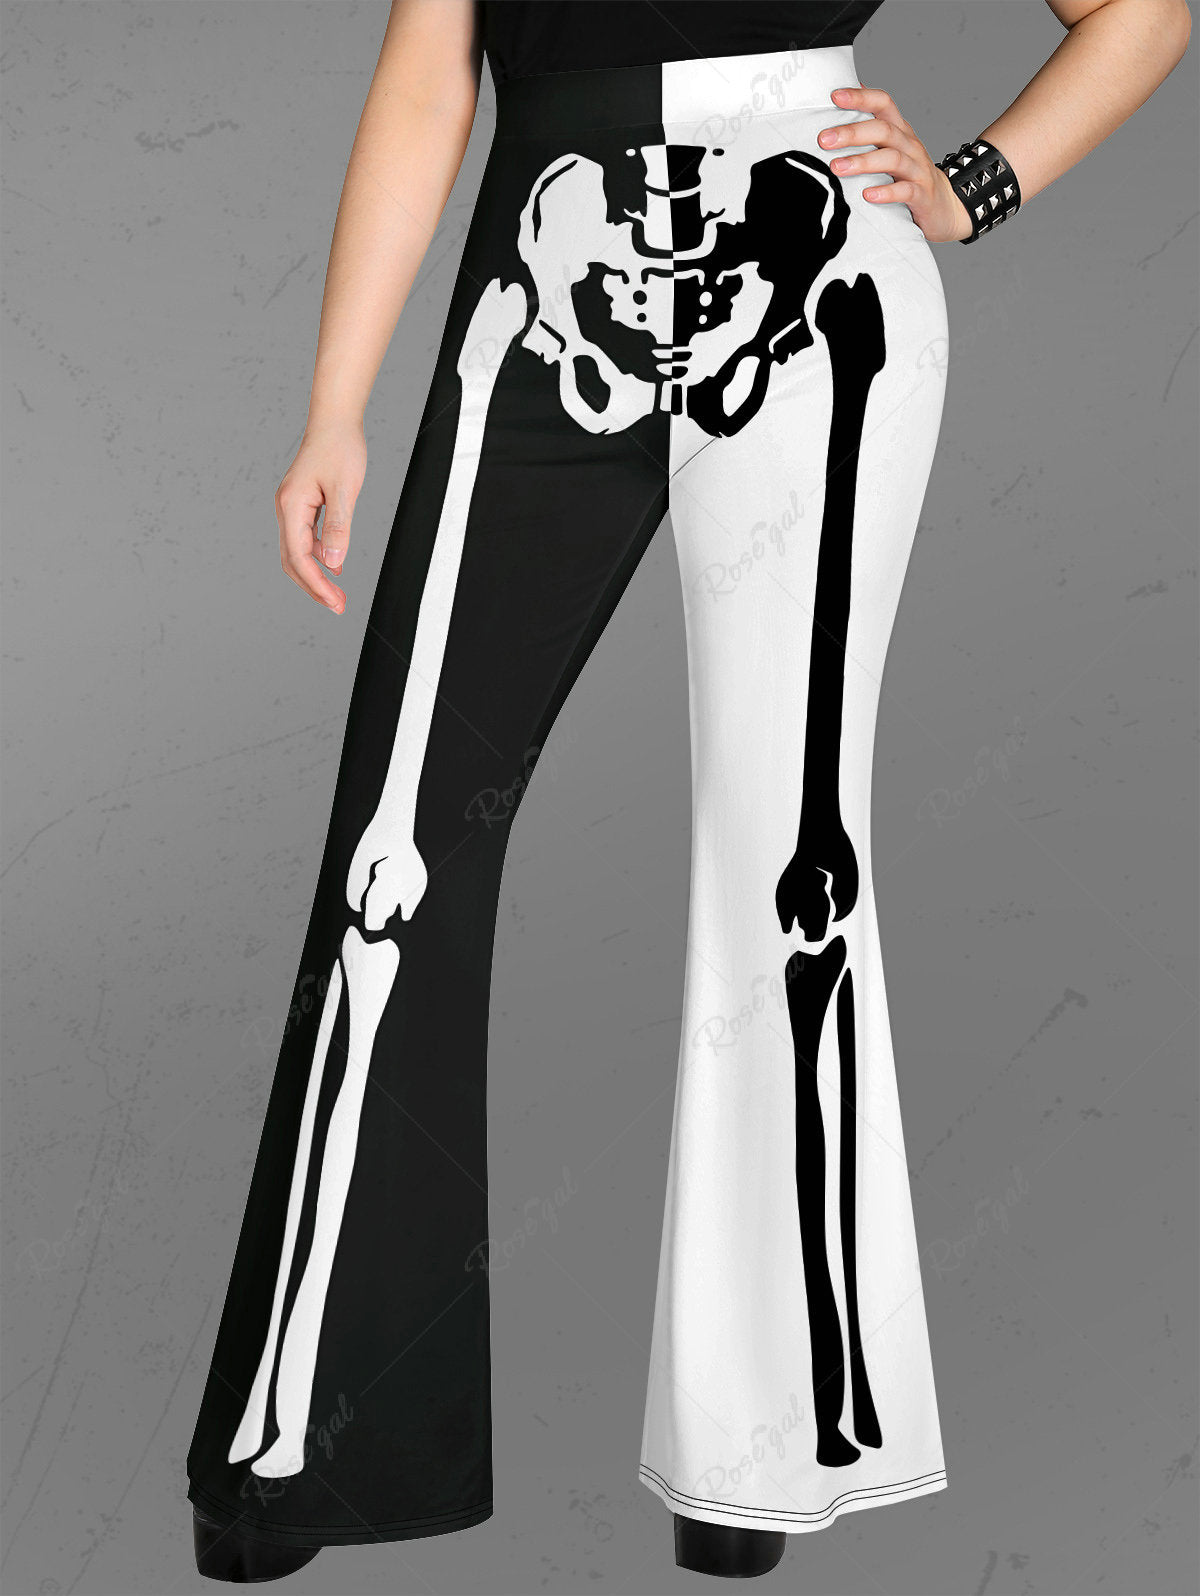 Marika Polyester Pants for Women for sale